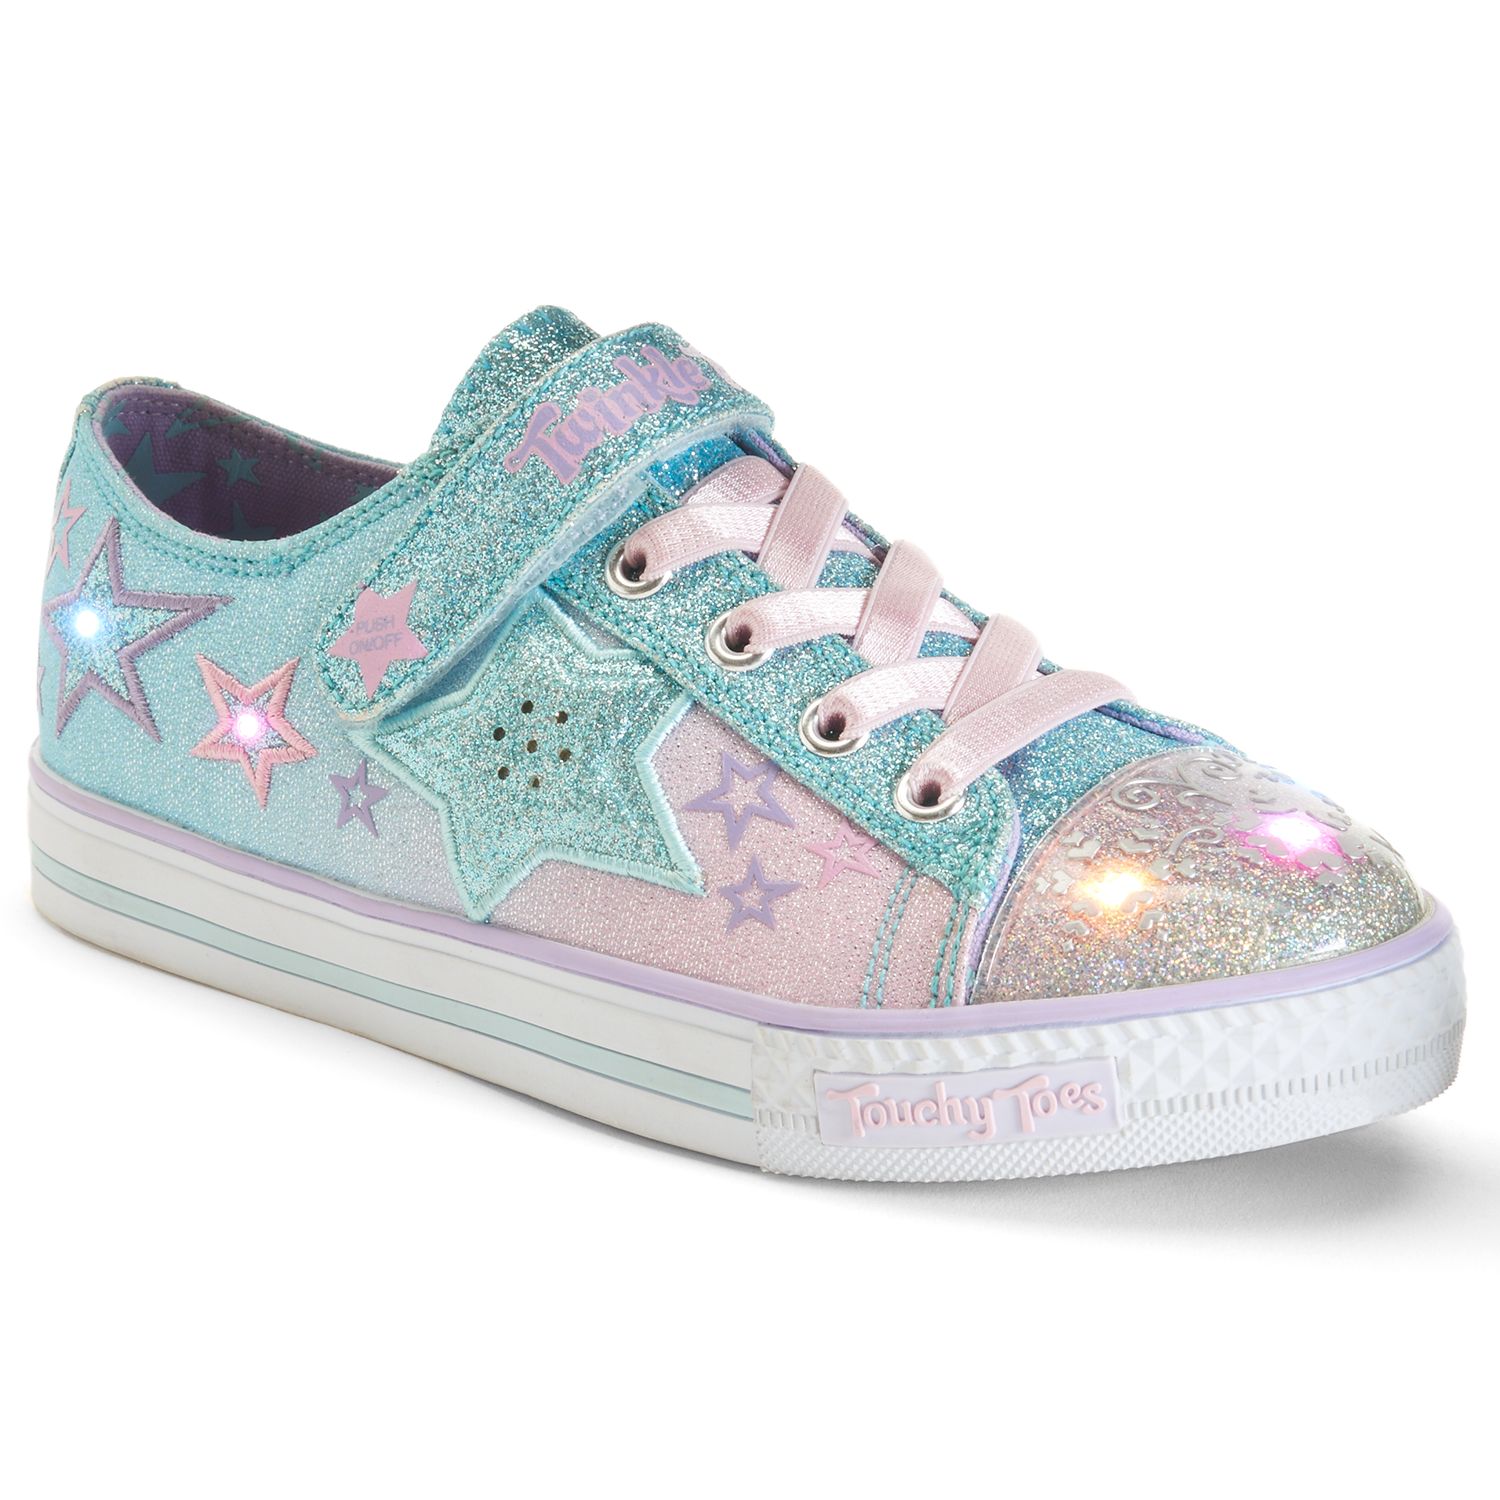 Skechers Twinkle Toes Wishes Enchanter 